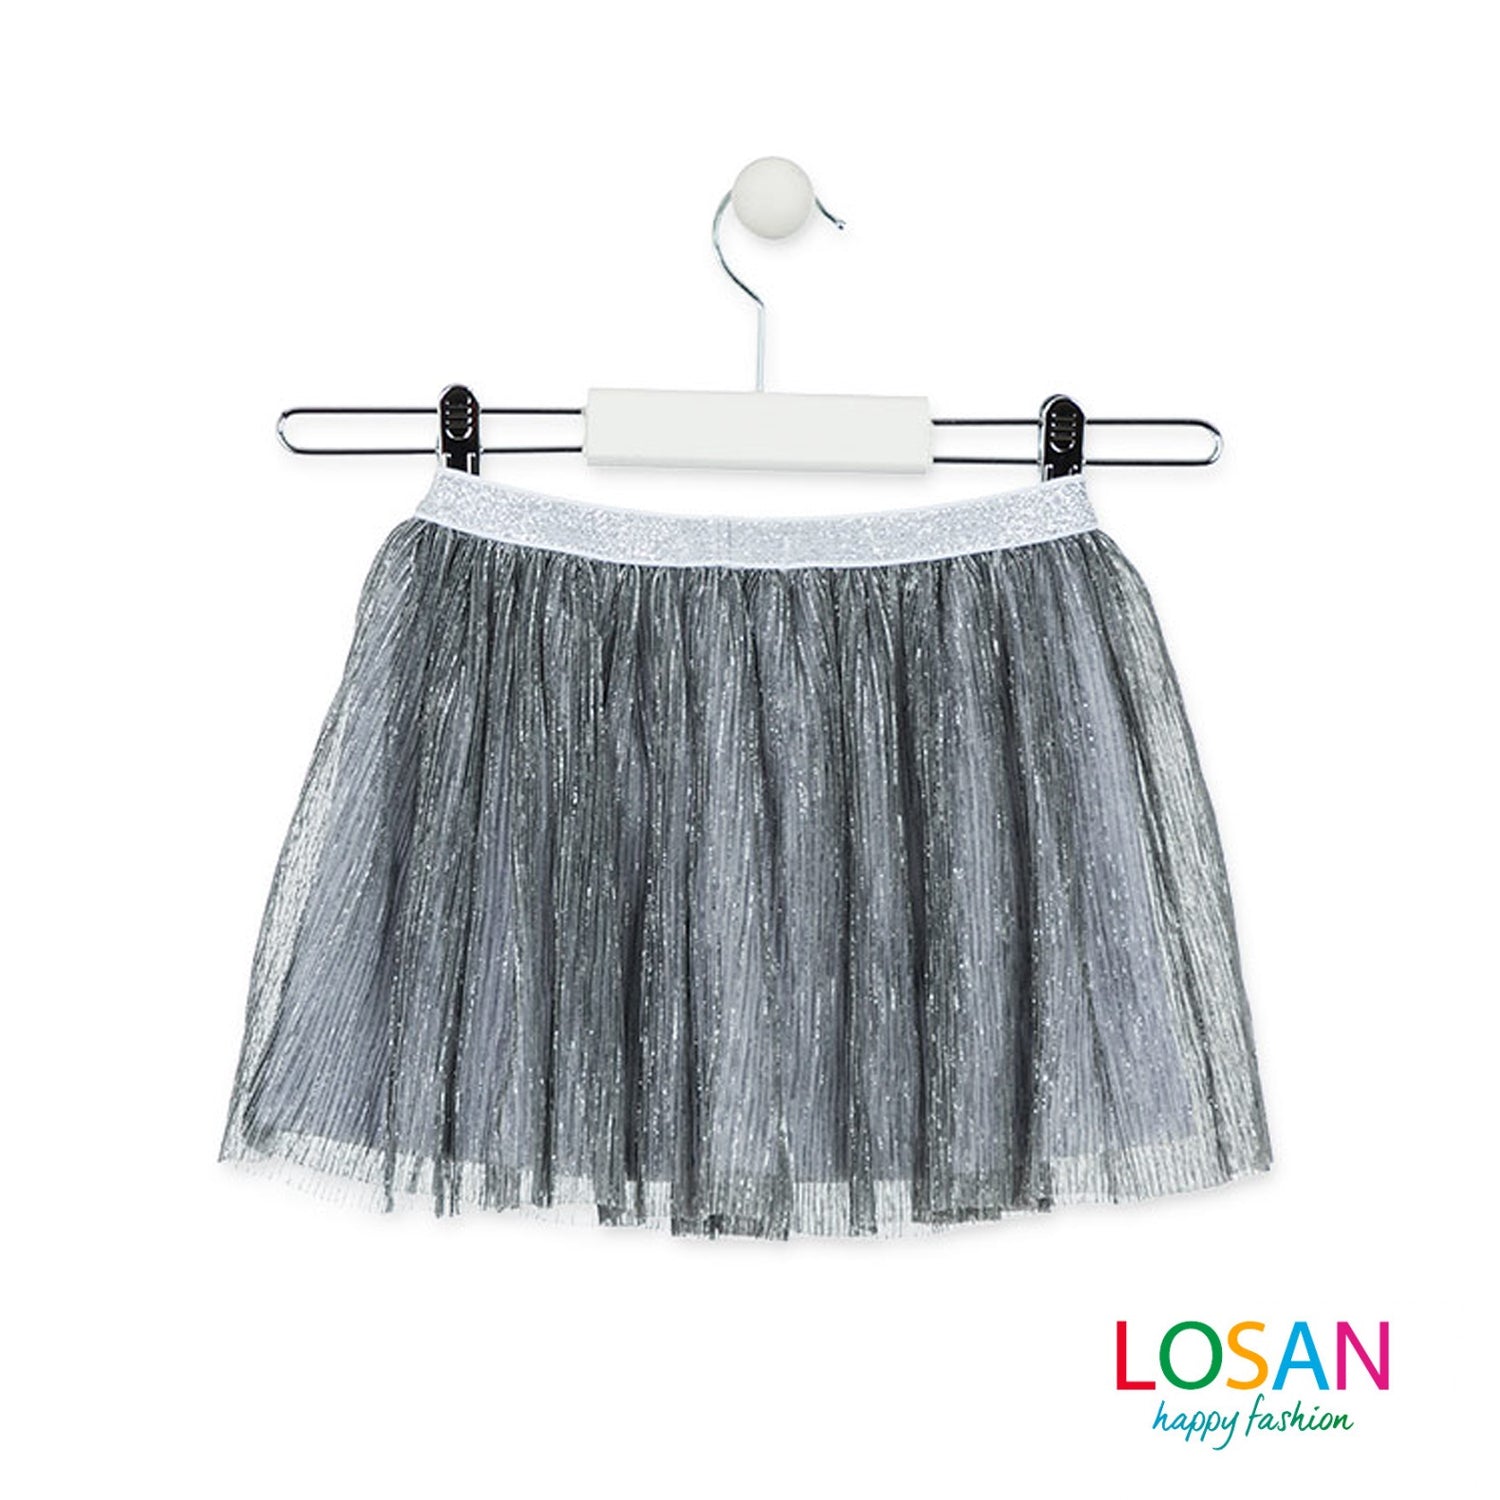 Losan - Gonna Argento in Tulle Bambina Junior